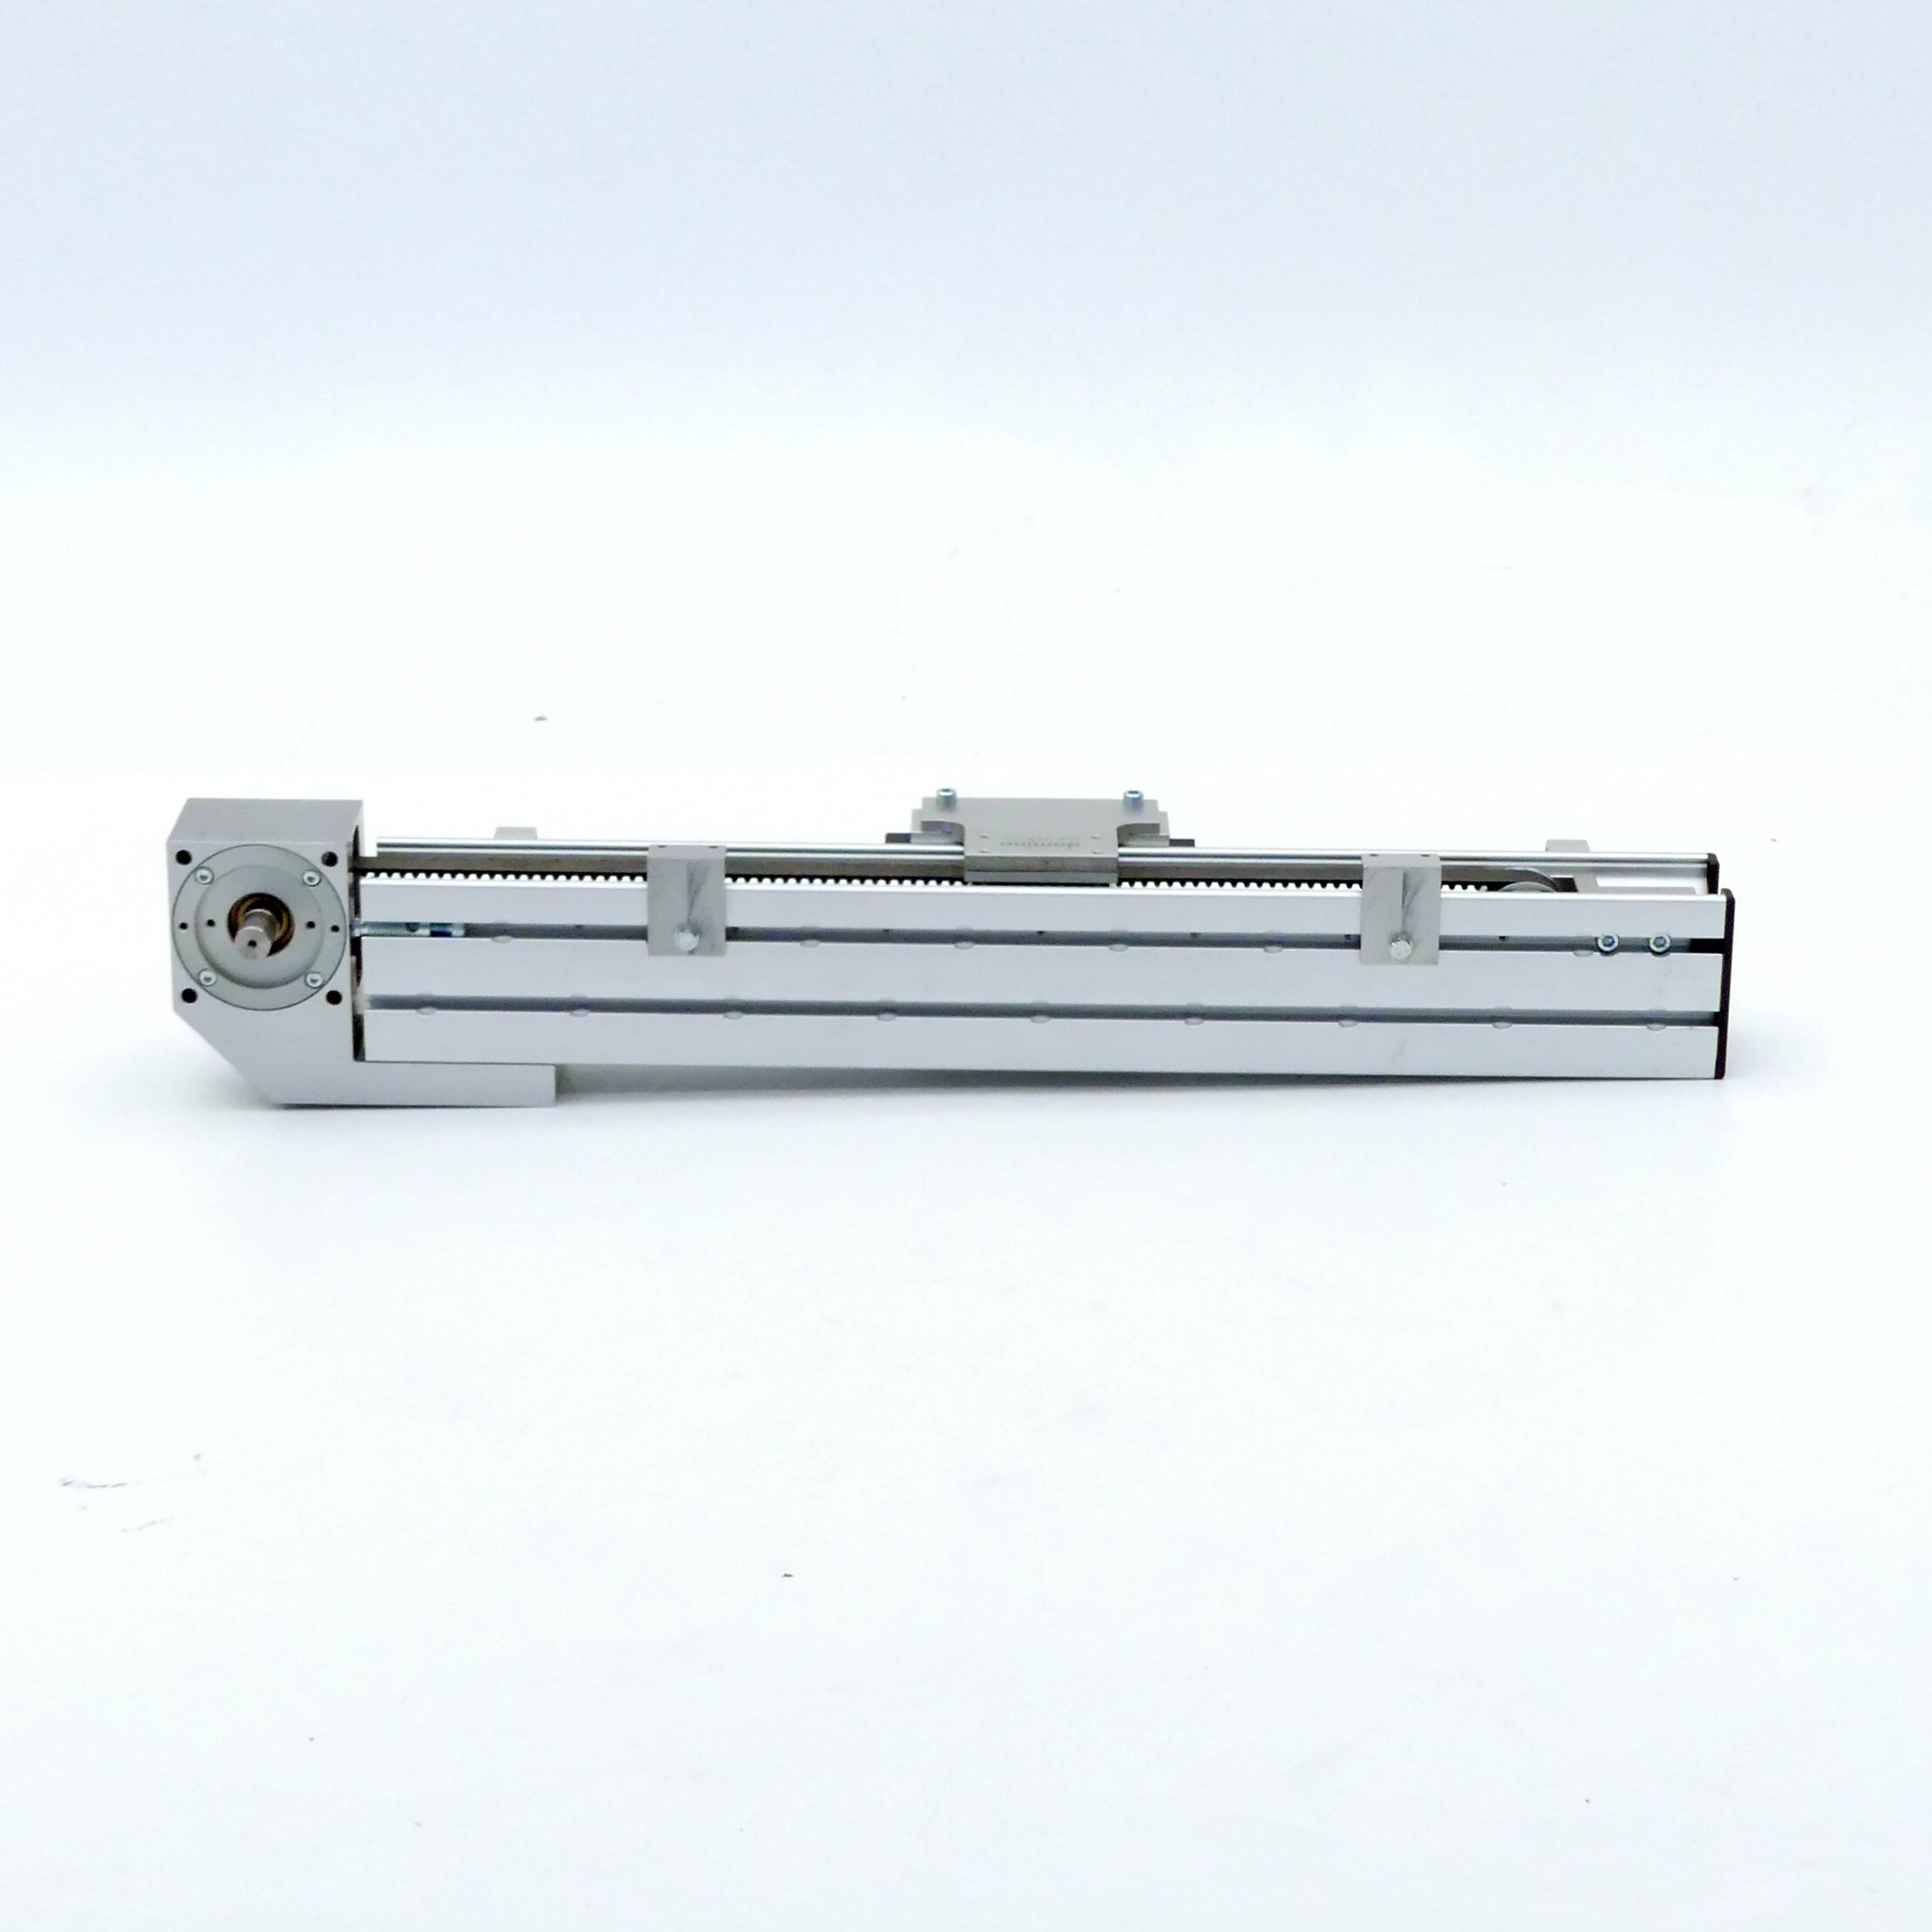 Linear axis LM 6 PE-270 re 